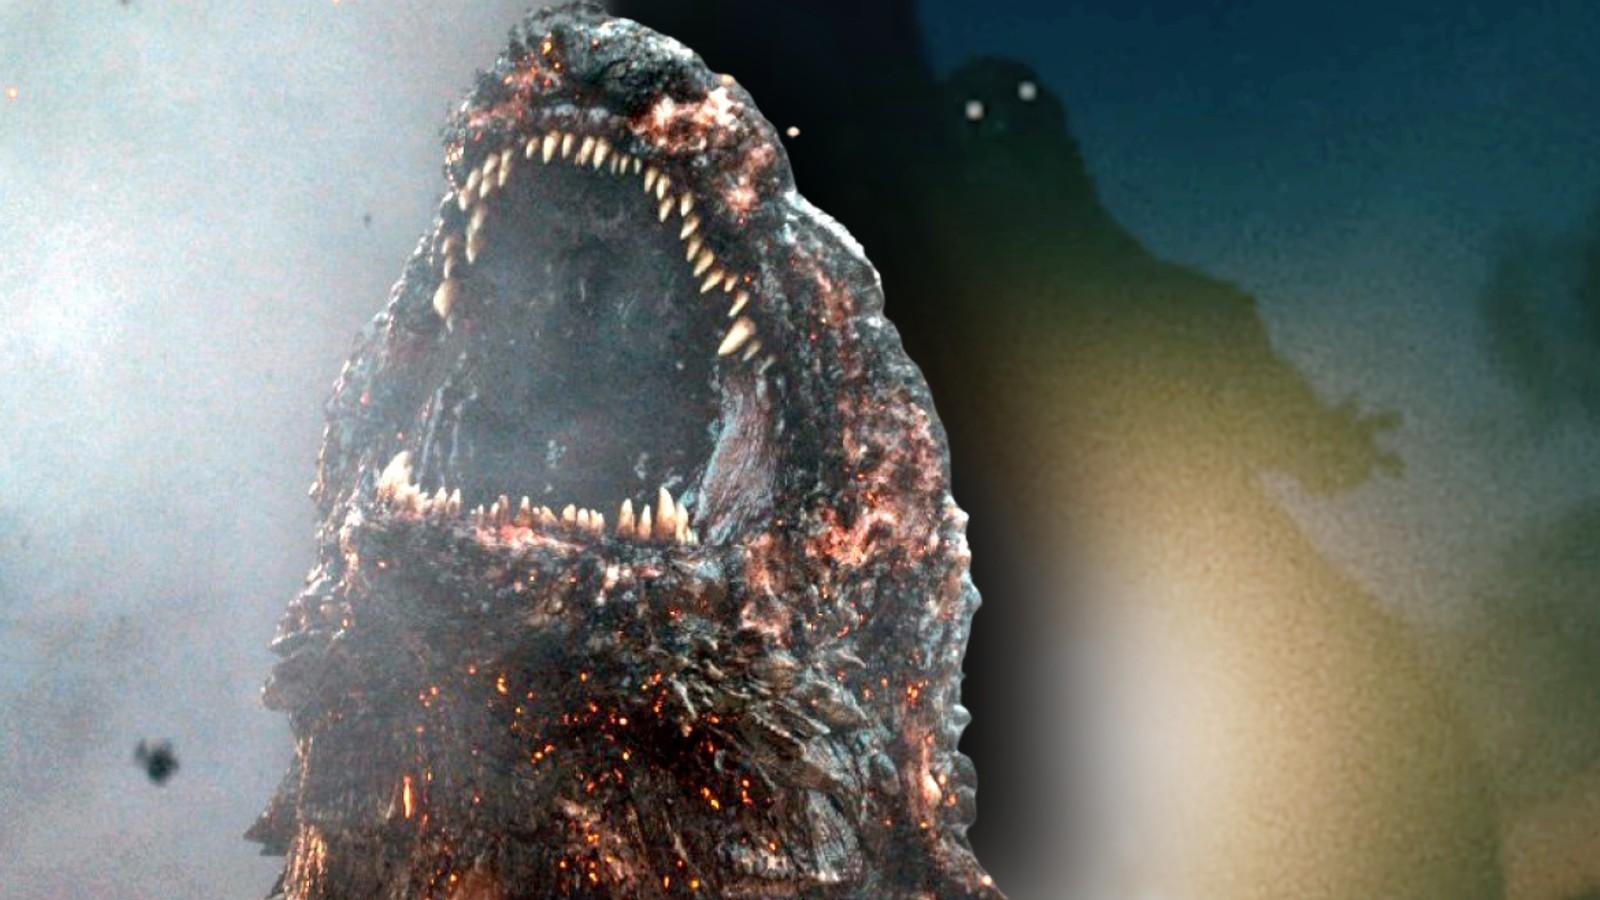 Godzilla in Minus One and the short horror film